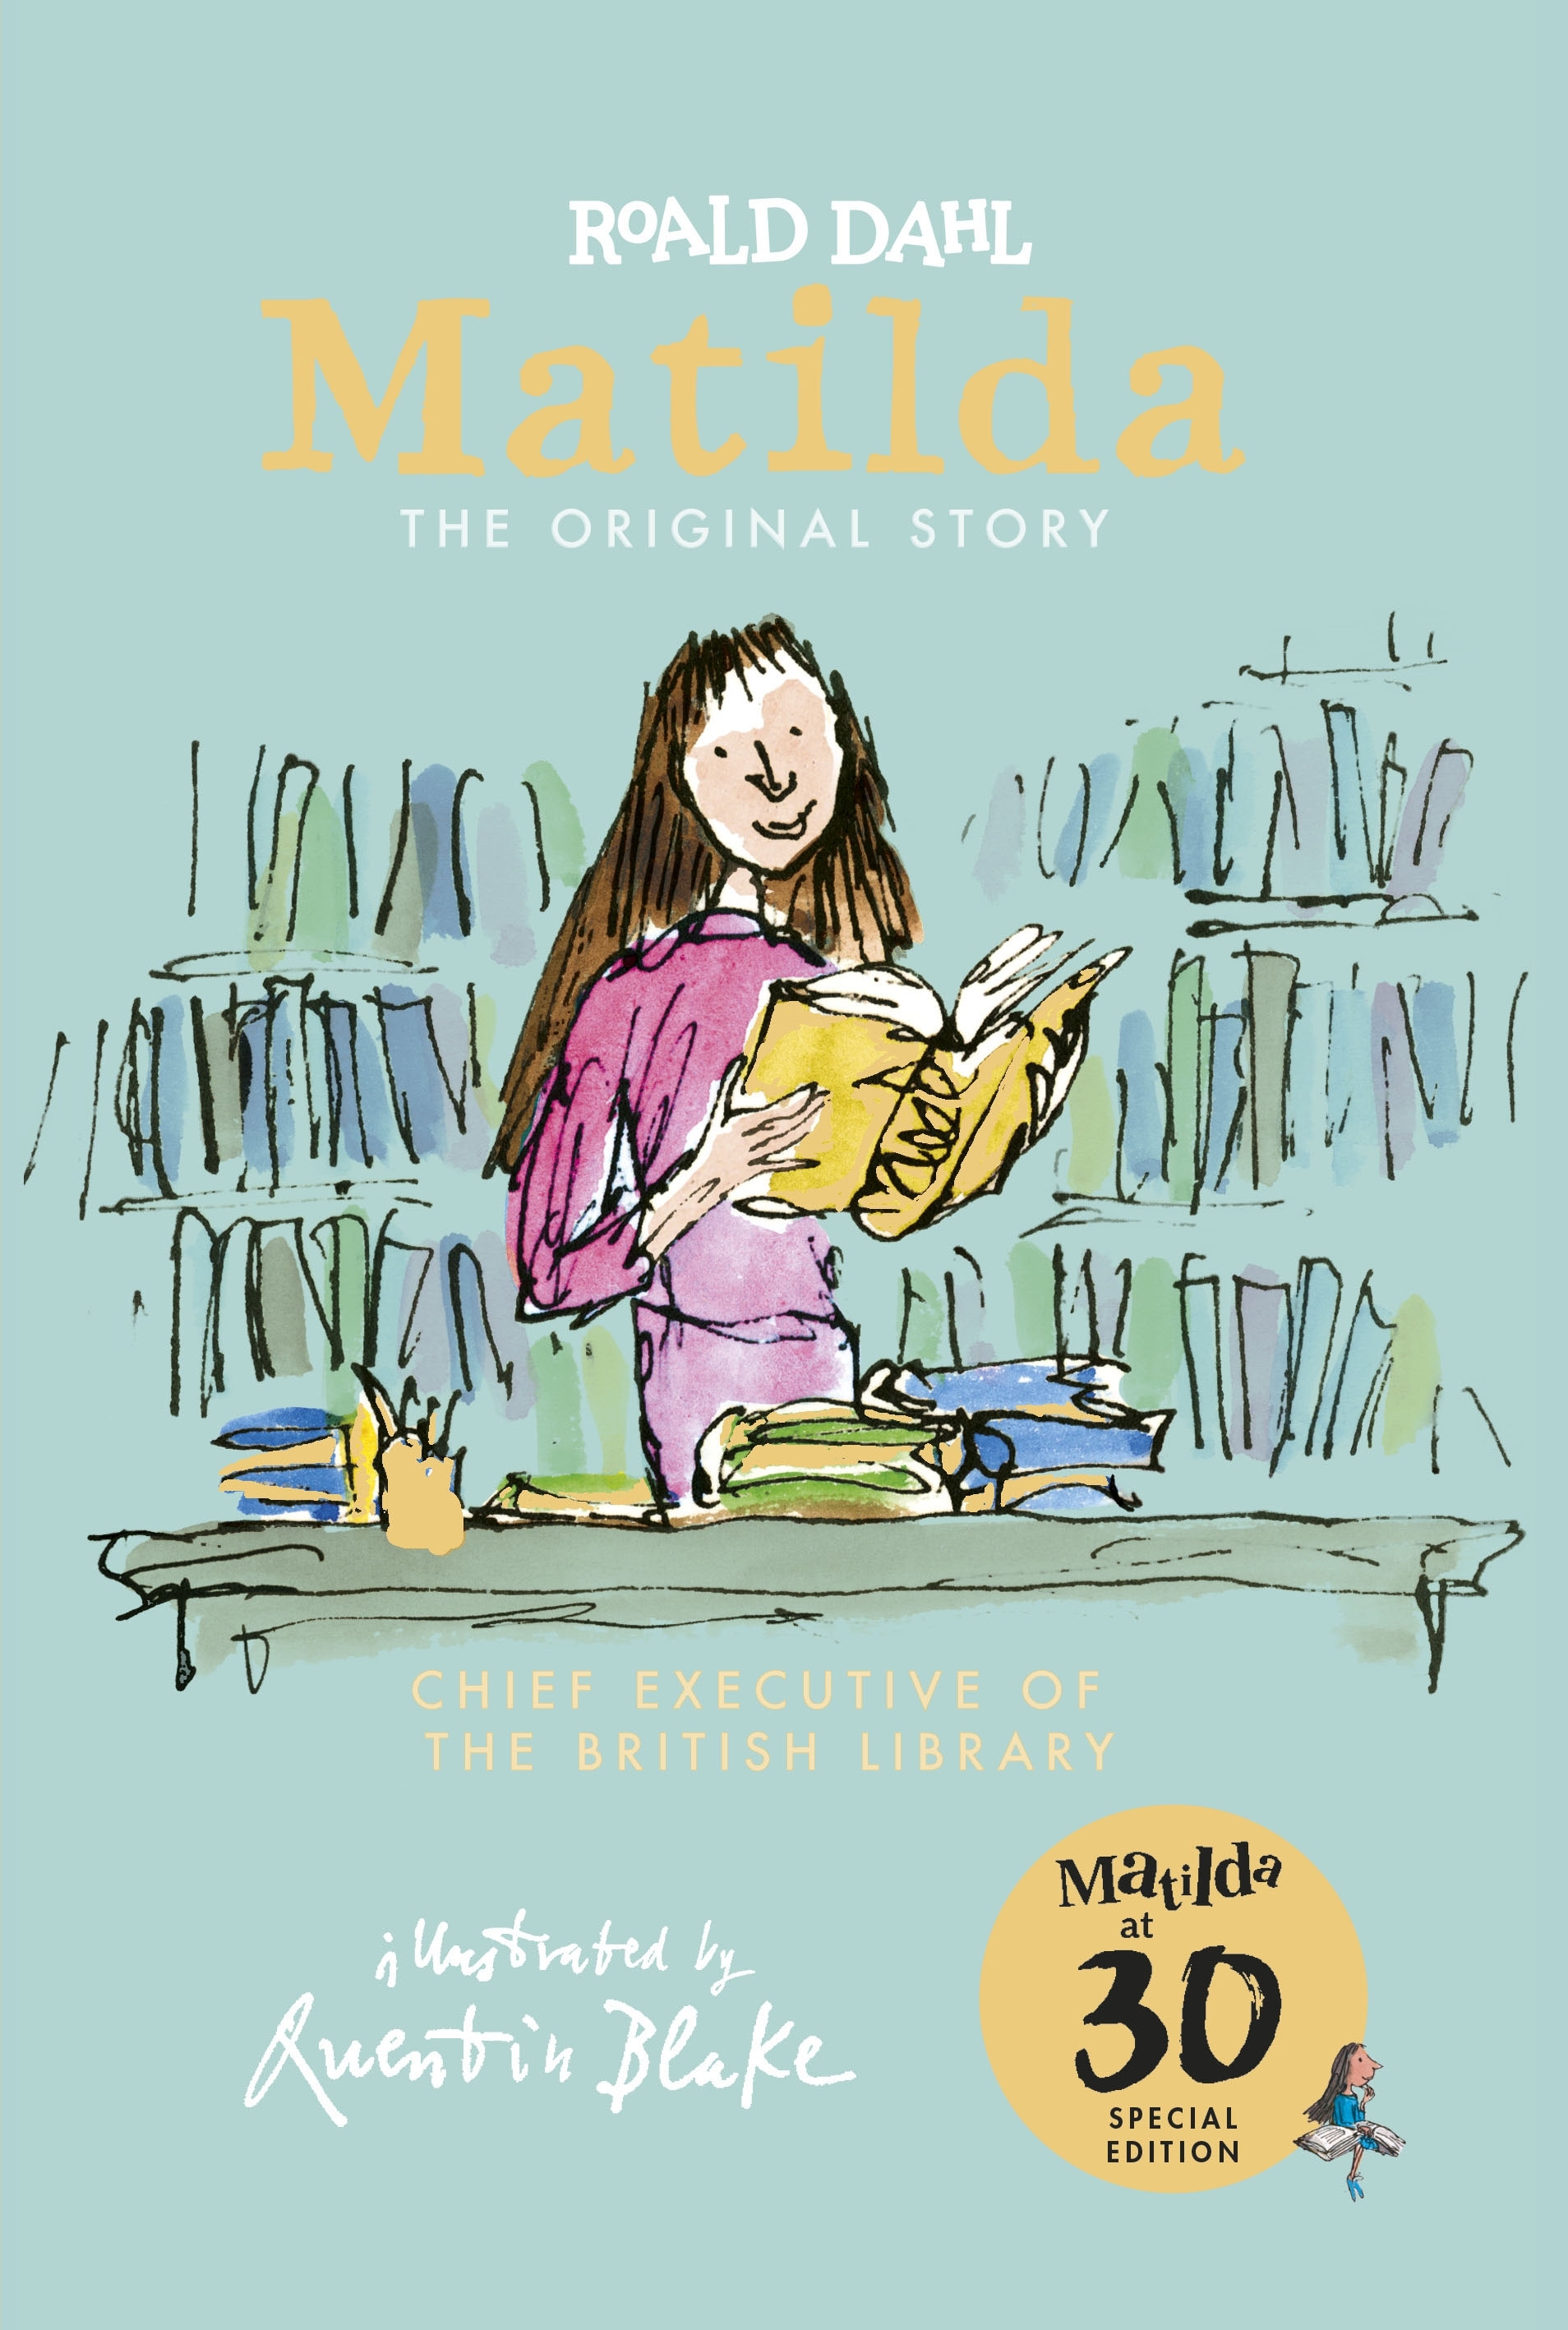 Matilda at 30: Chief Executive of the British Library by Quentin Blake